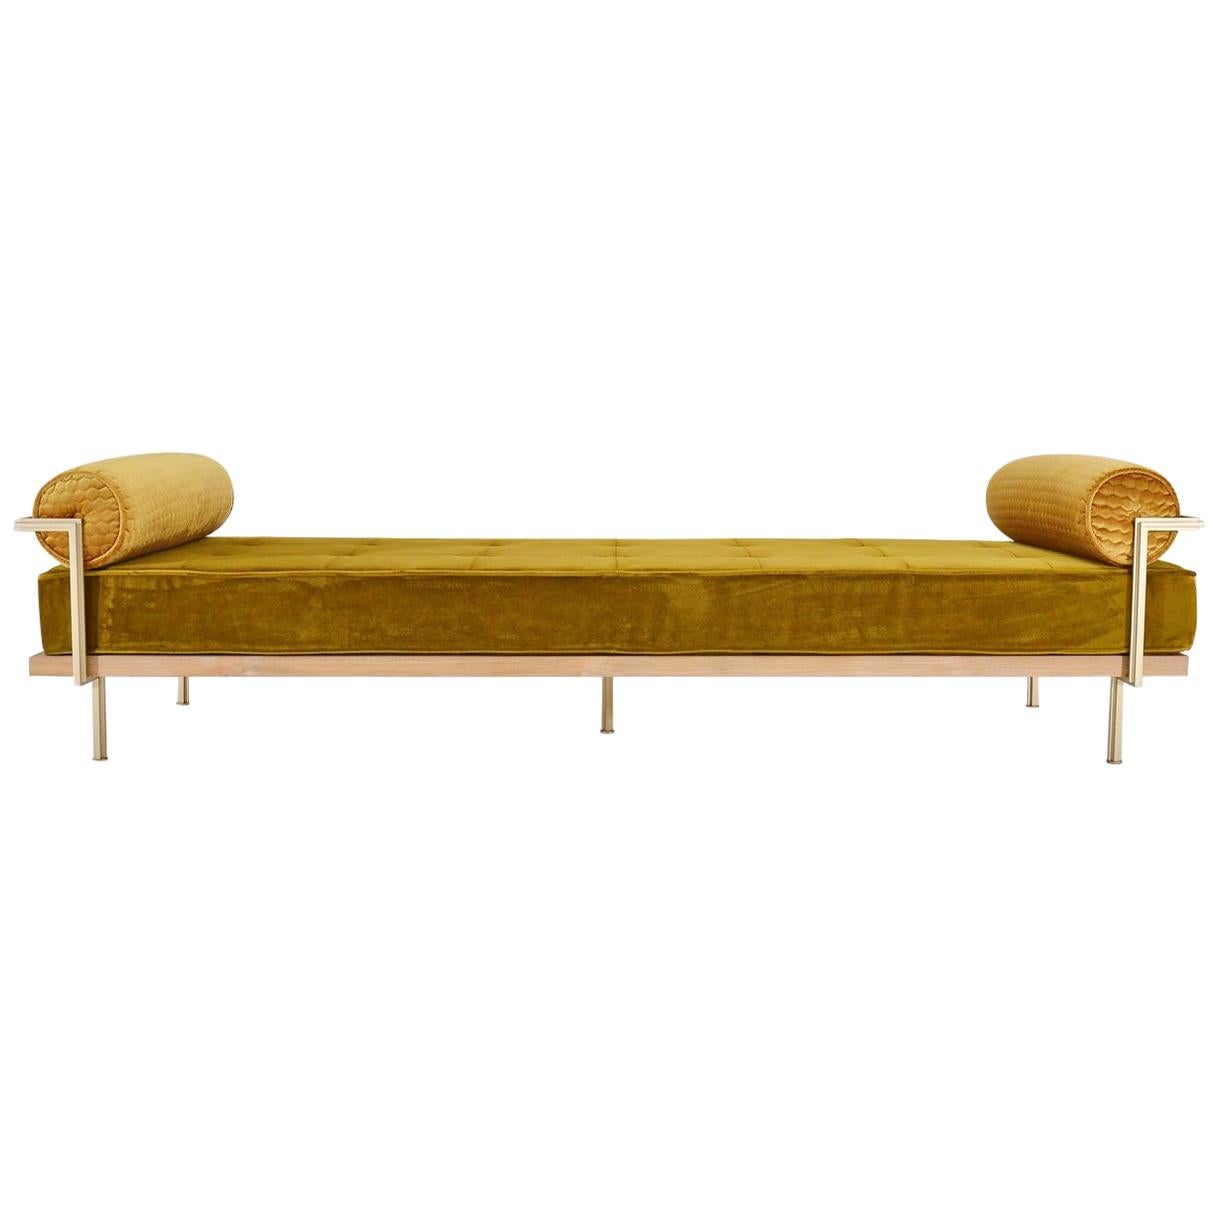 Bespoke Double Daybed in Reclaimed Hardwood and Solid Brass Frame